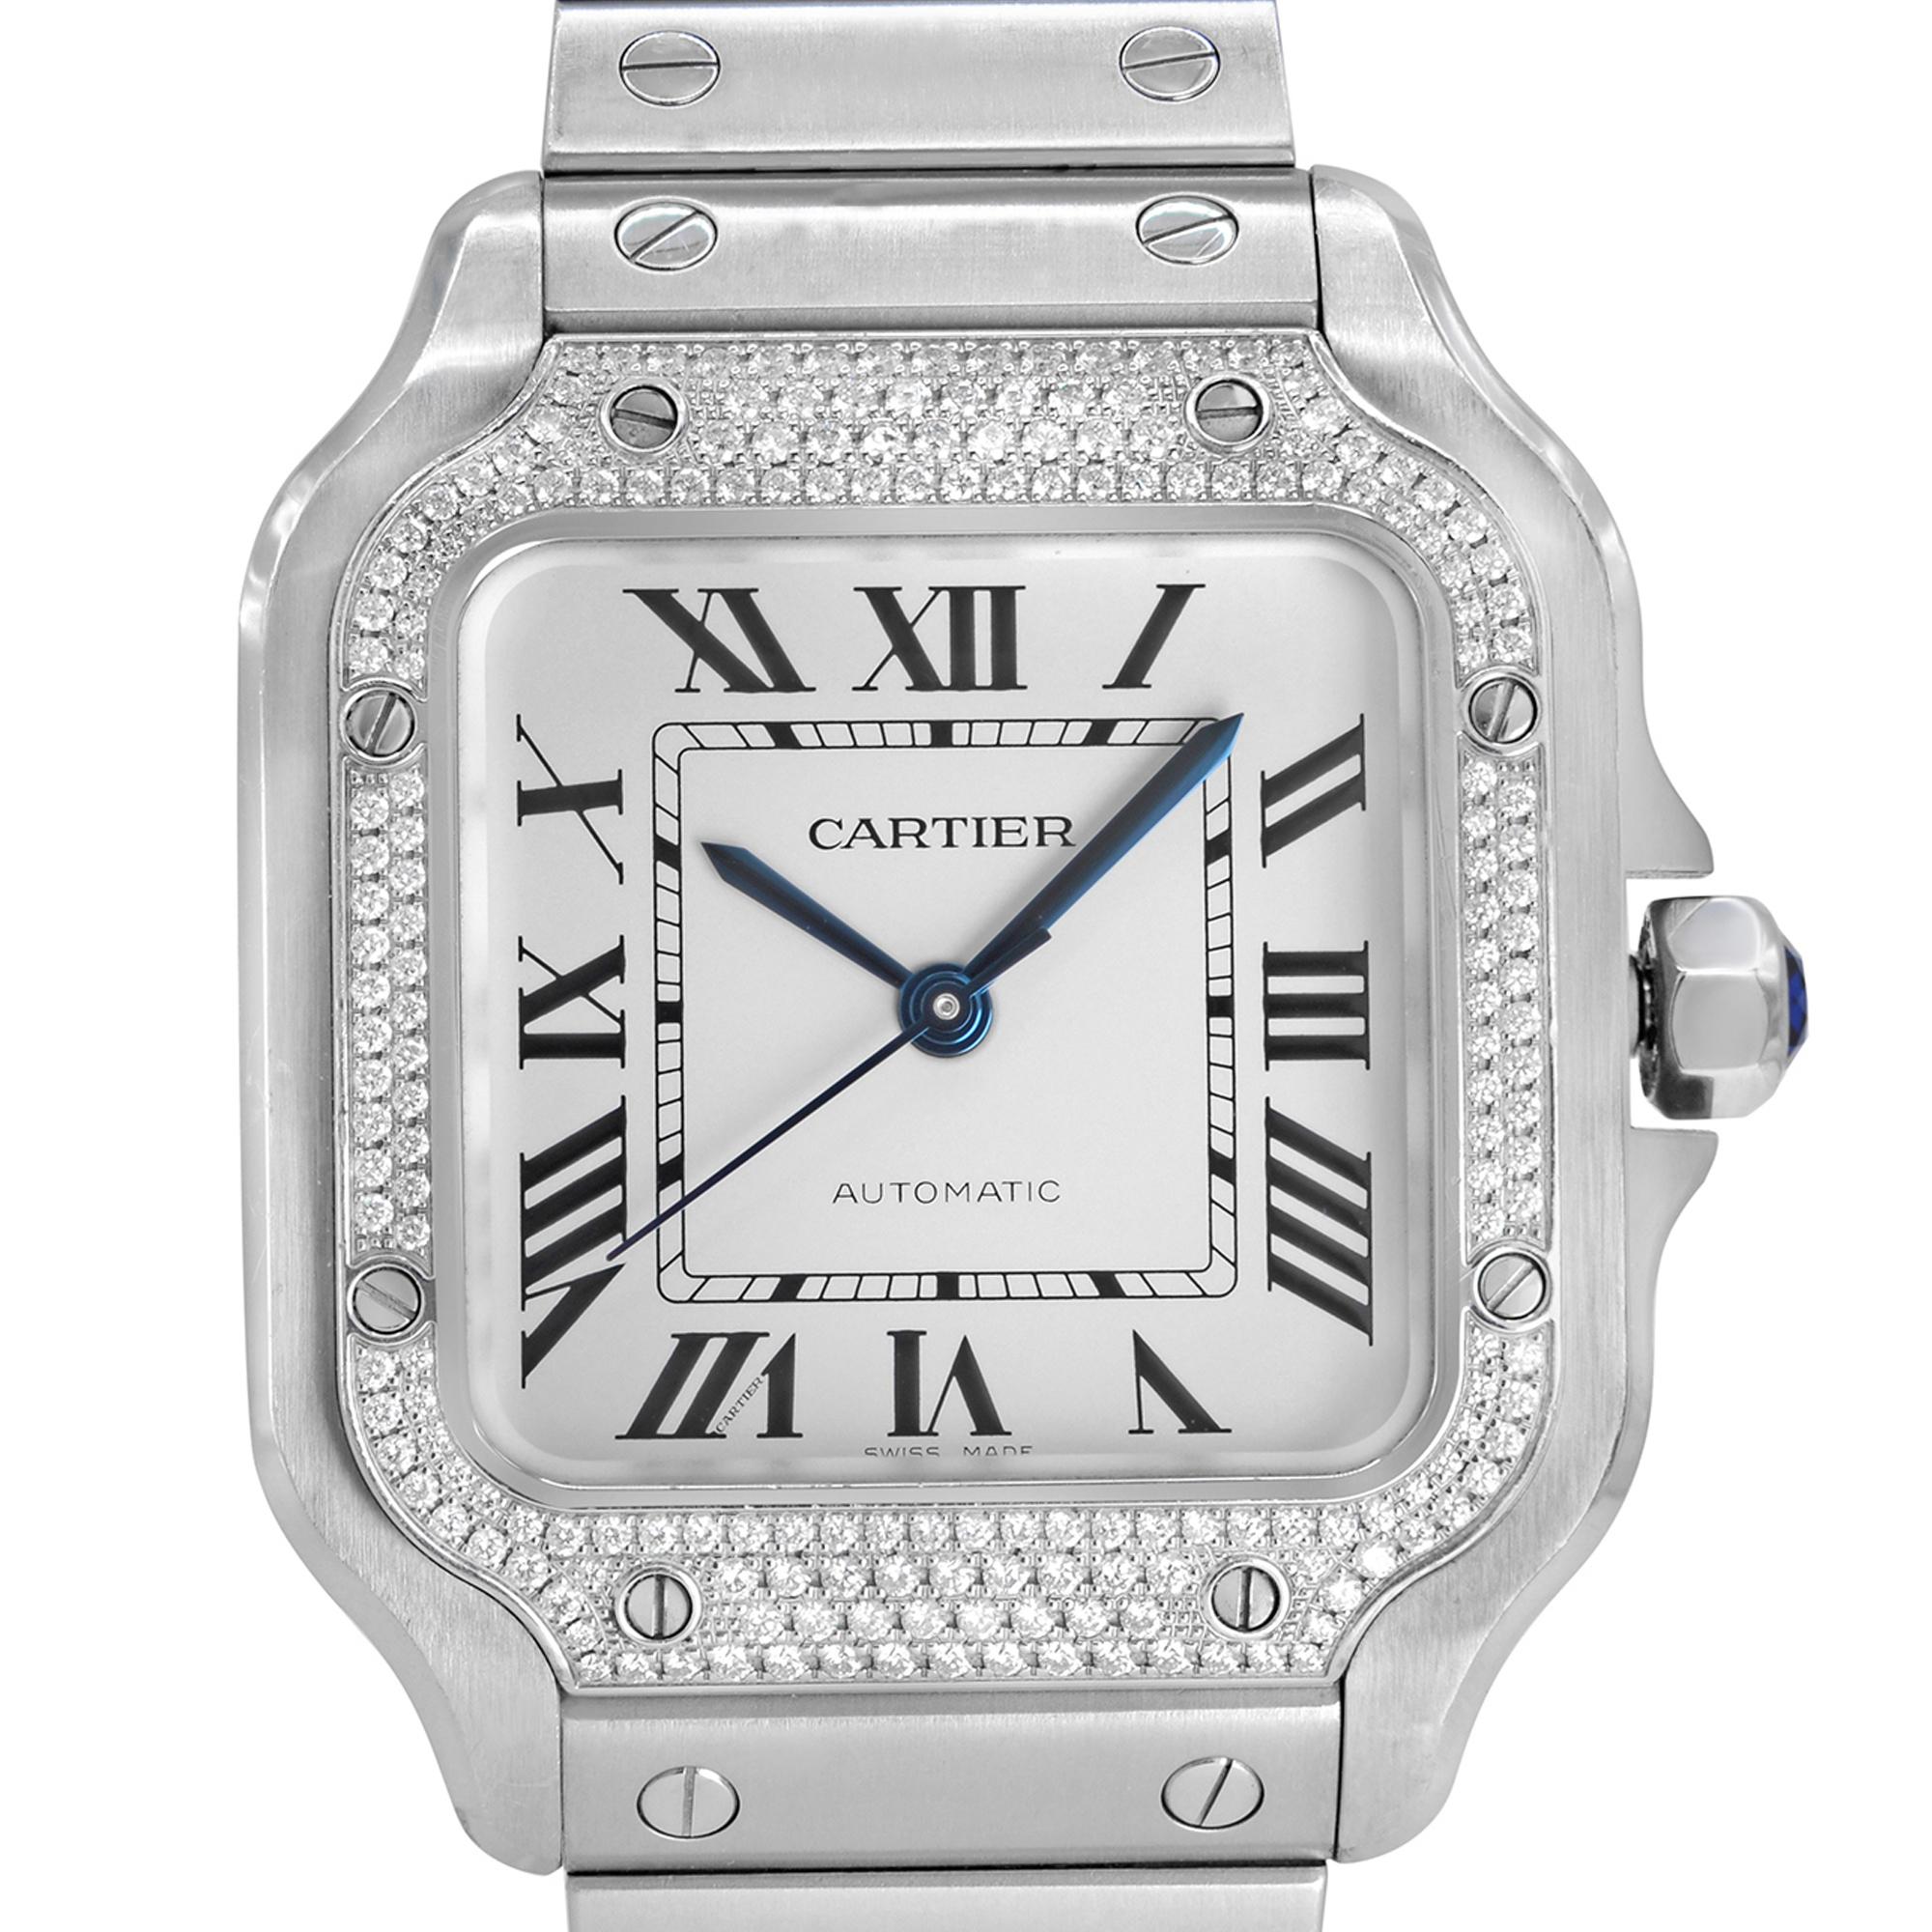 Display Model Cartier Santos 35mm Stainless Steel Diamond Bezel White Dial Automatic Women's Watch W4SA0005. This Beautiful Women's Timepiece is Powered By a Mechanical Automatic Movement and Features: Stainless Steel Case, Diamond Bezel with a